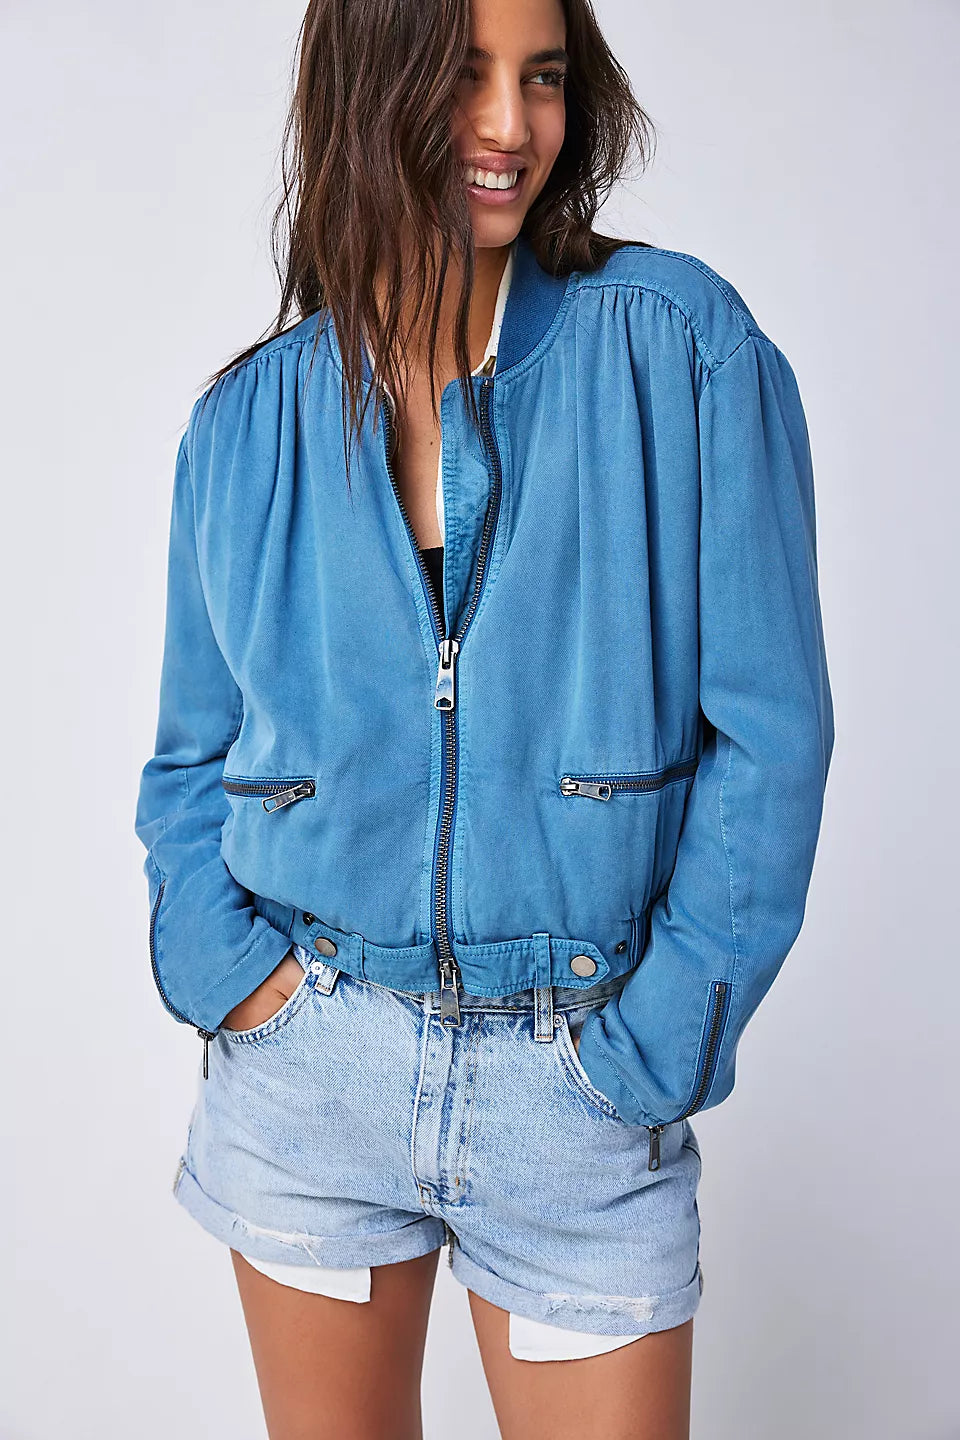 Free People Knockout Siren Bomber